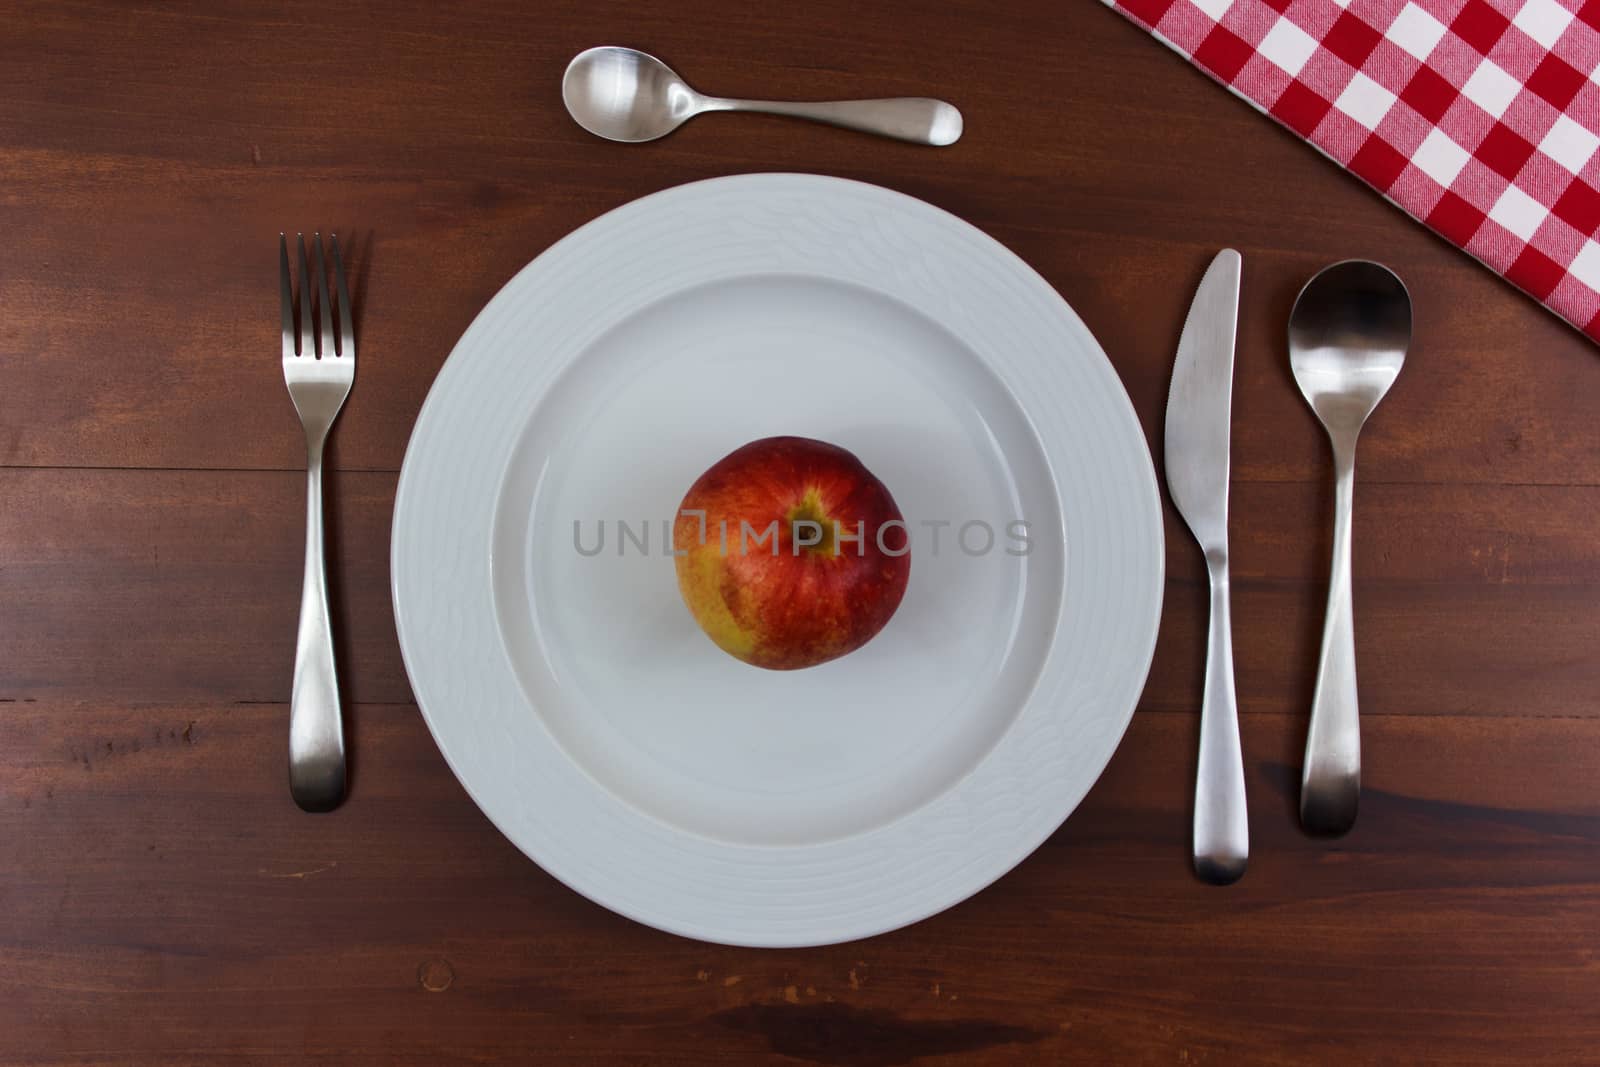 white dish with cutlery and apple in the center of wooden table